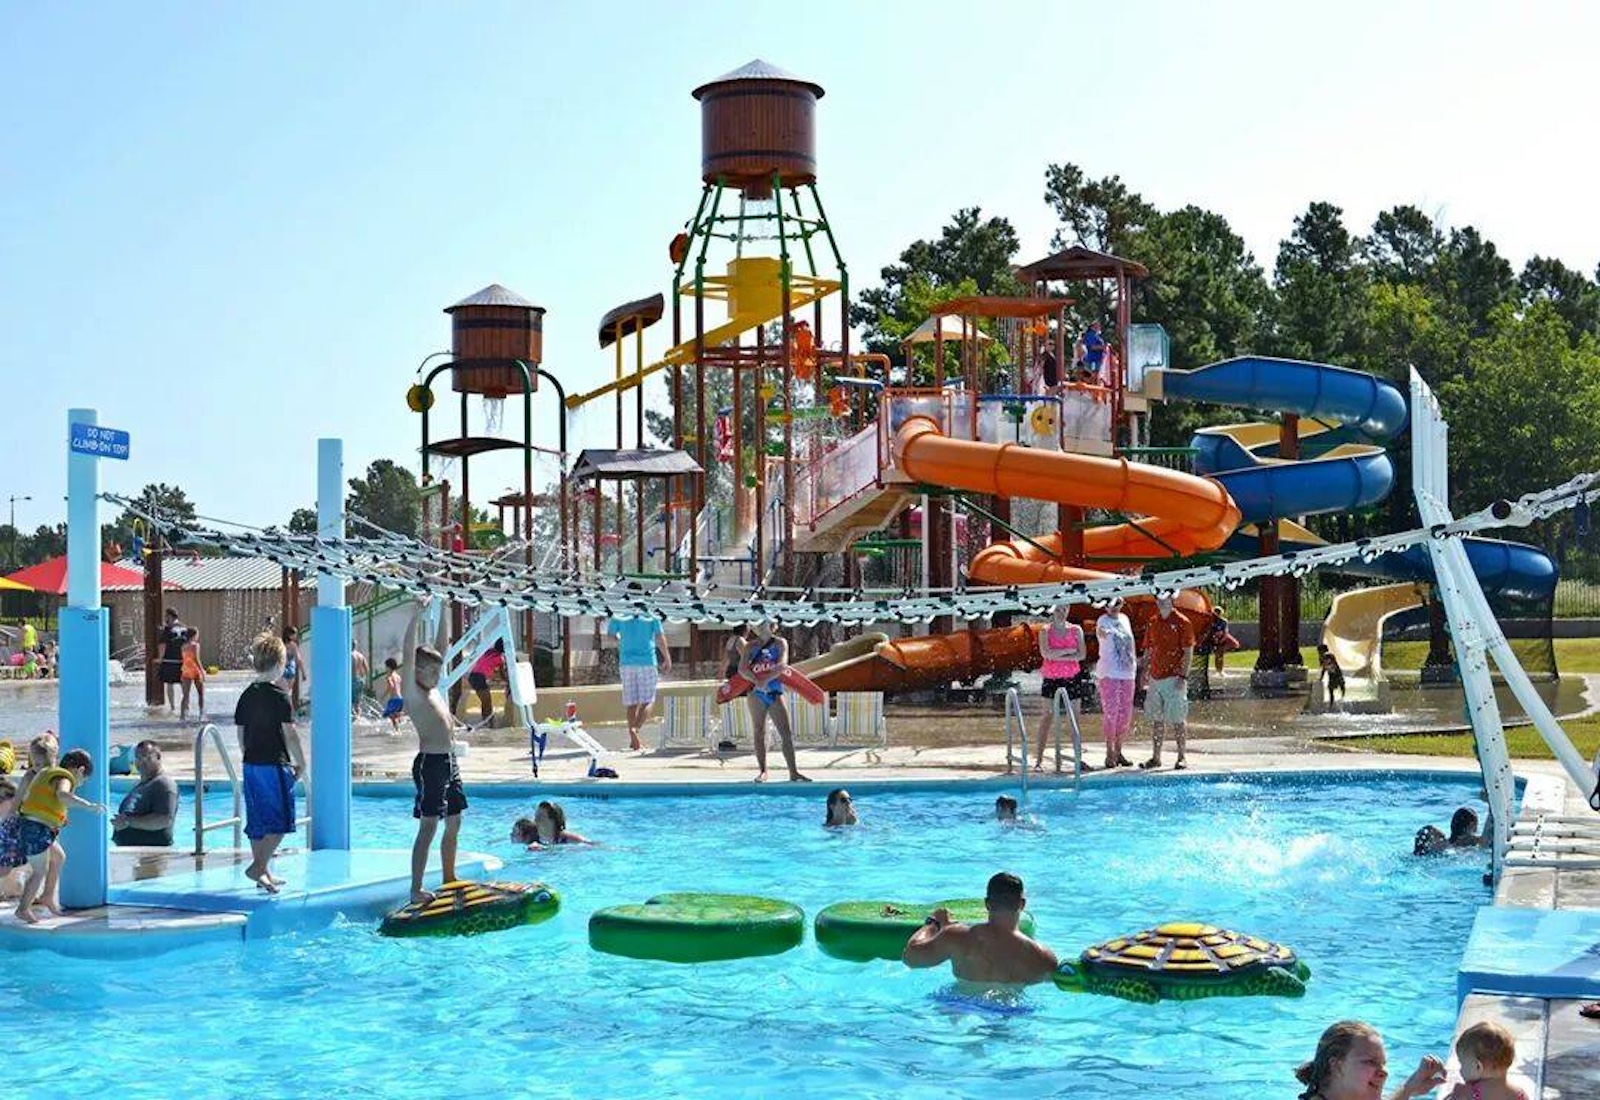 Holiday springs water park 